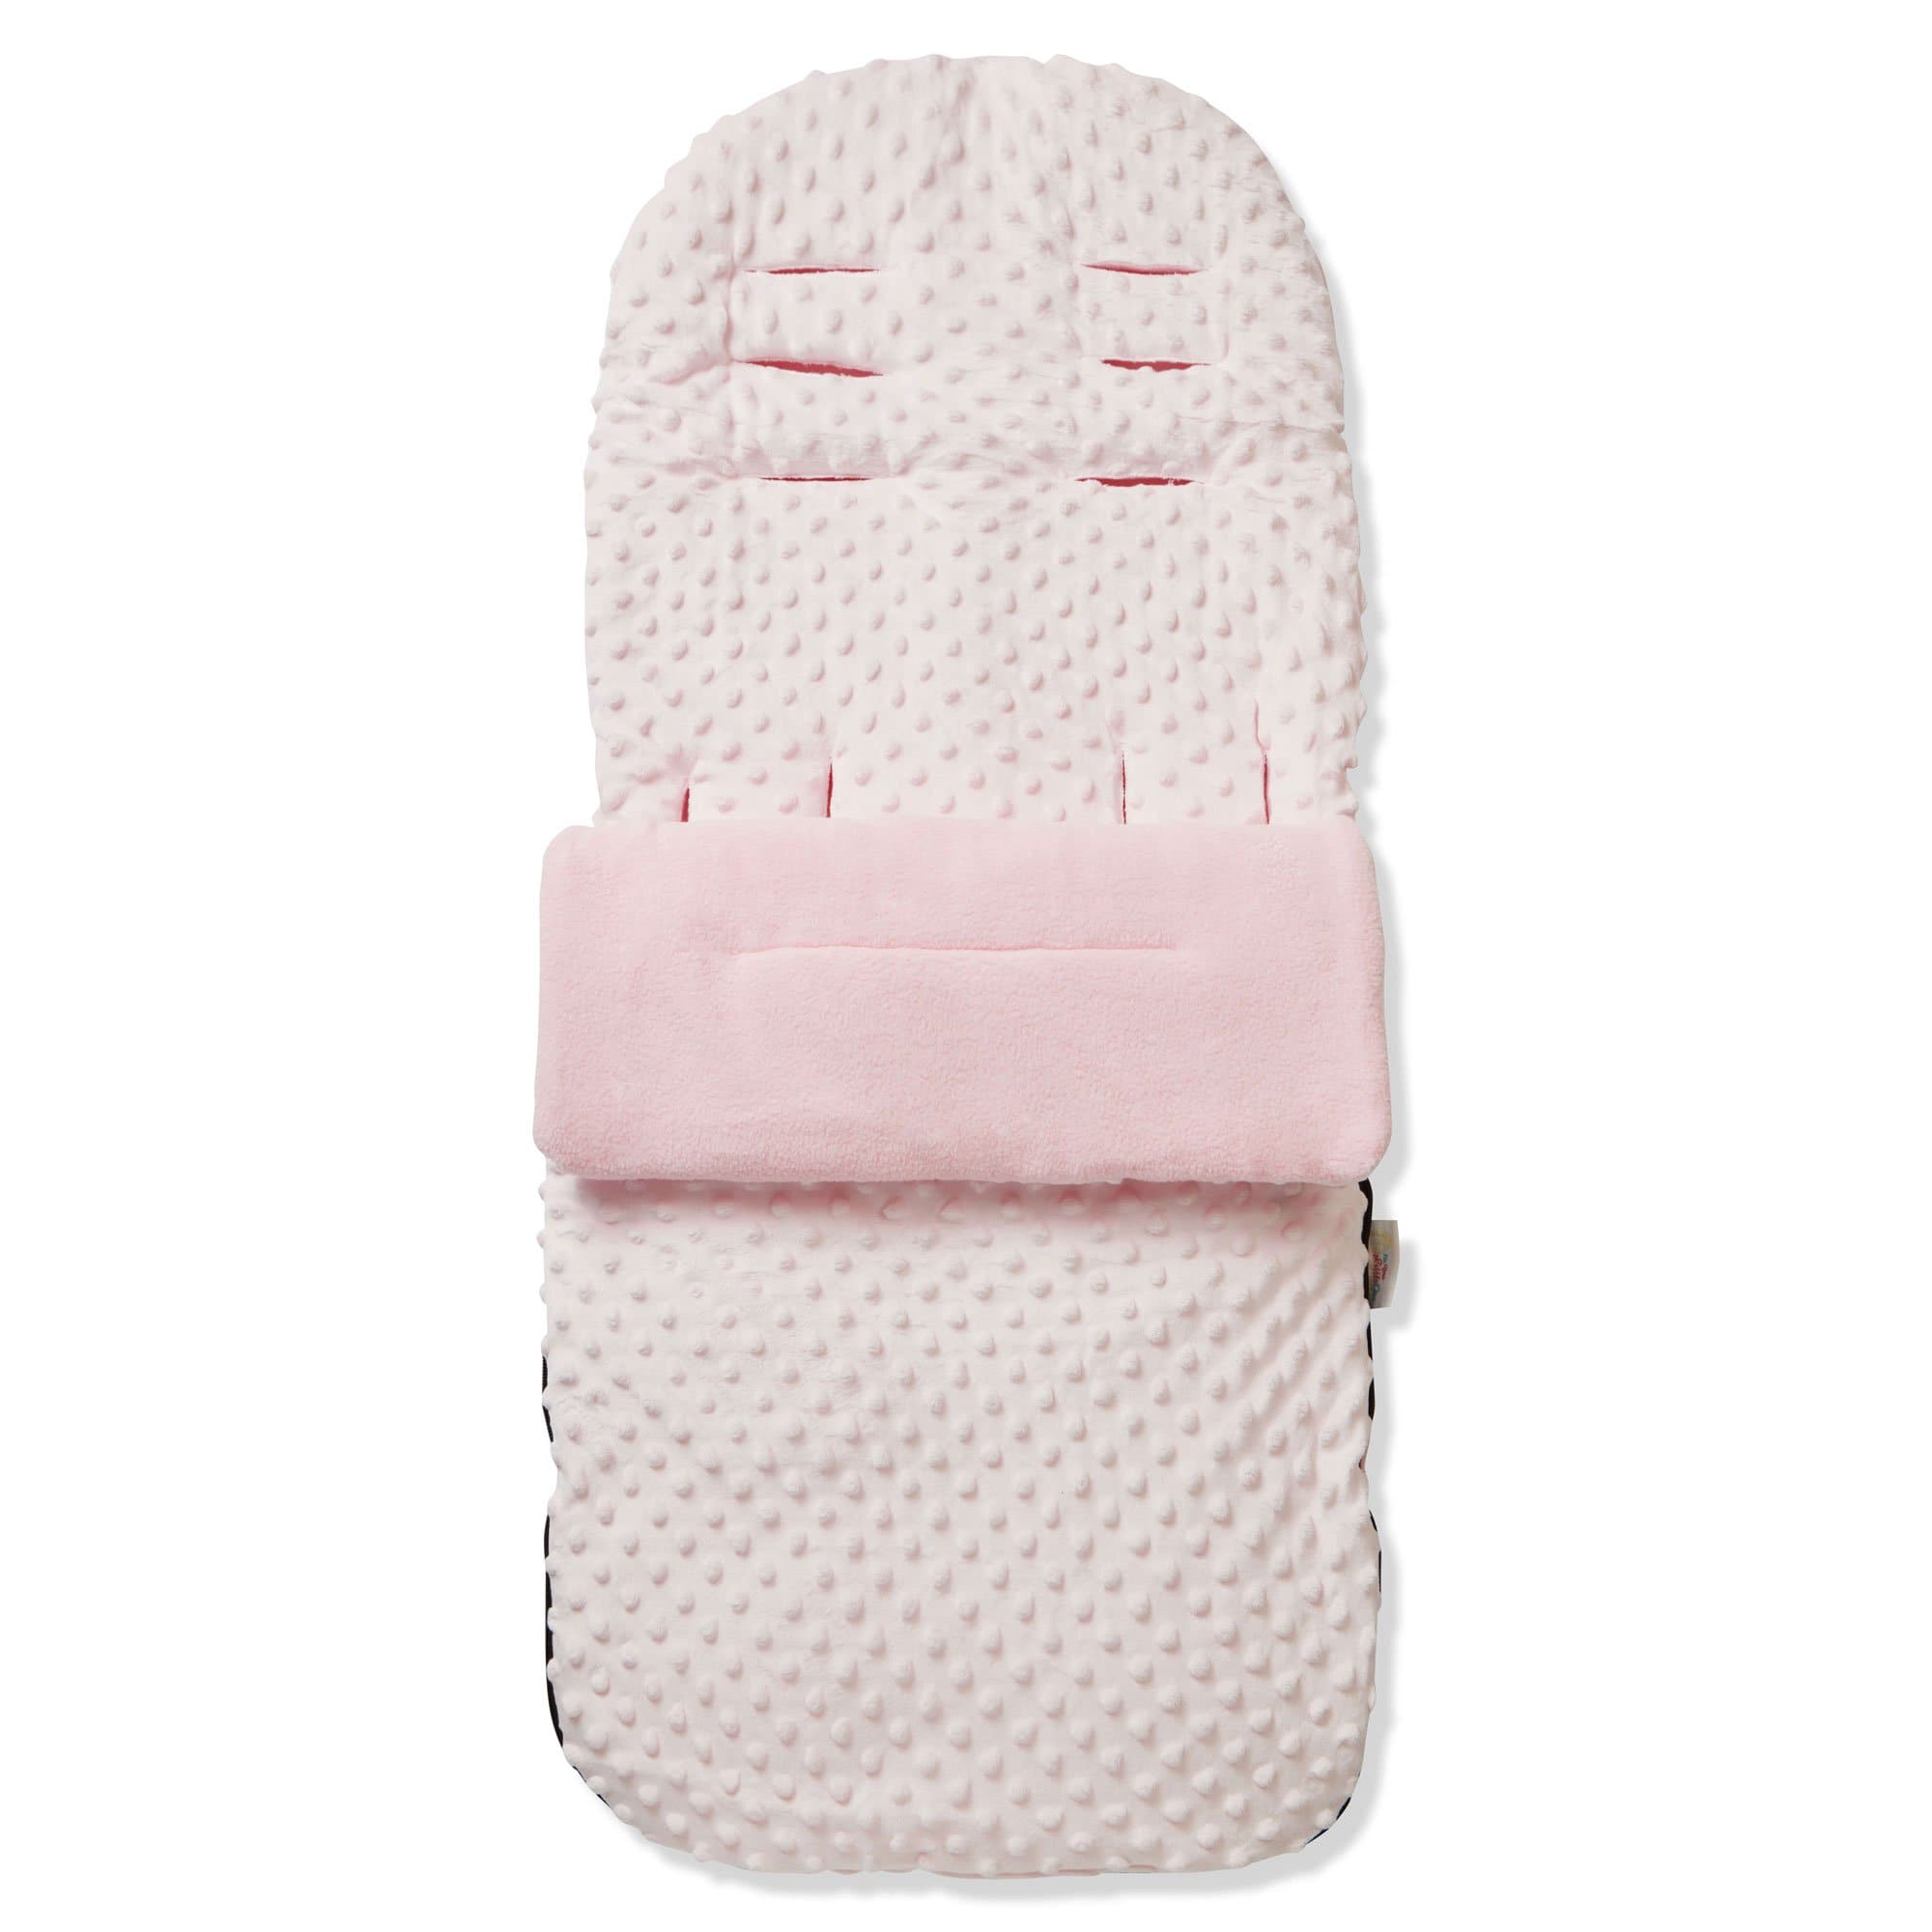 Dimple Footmuff / Cosy Toes Compatible with Joolz - Pink / Fits All Models | For Your Little One